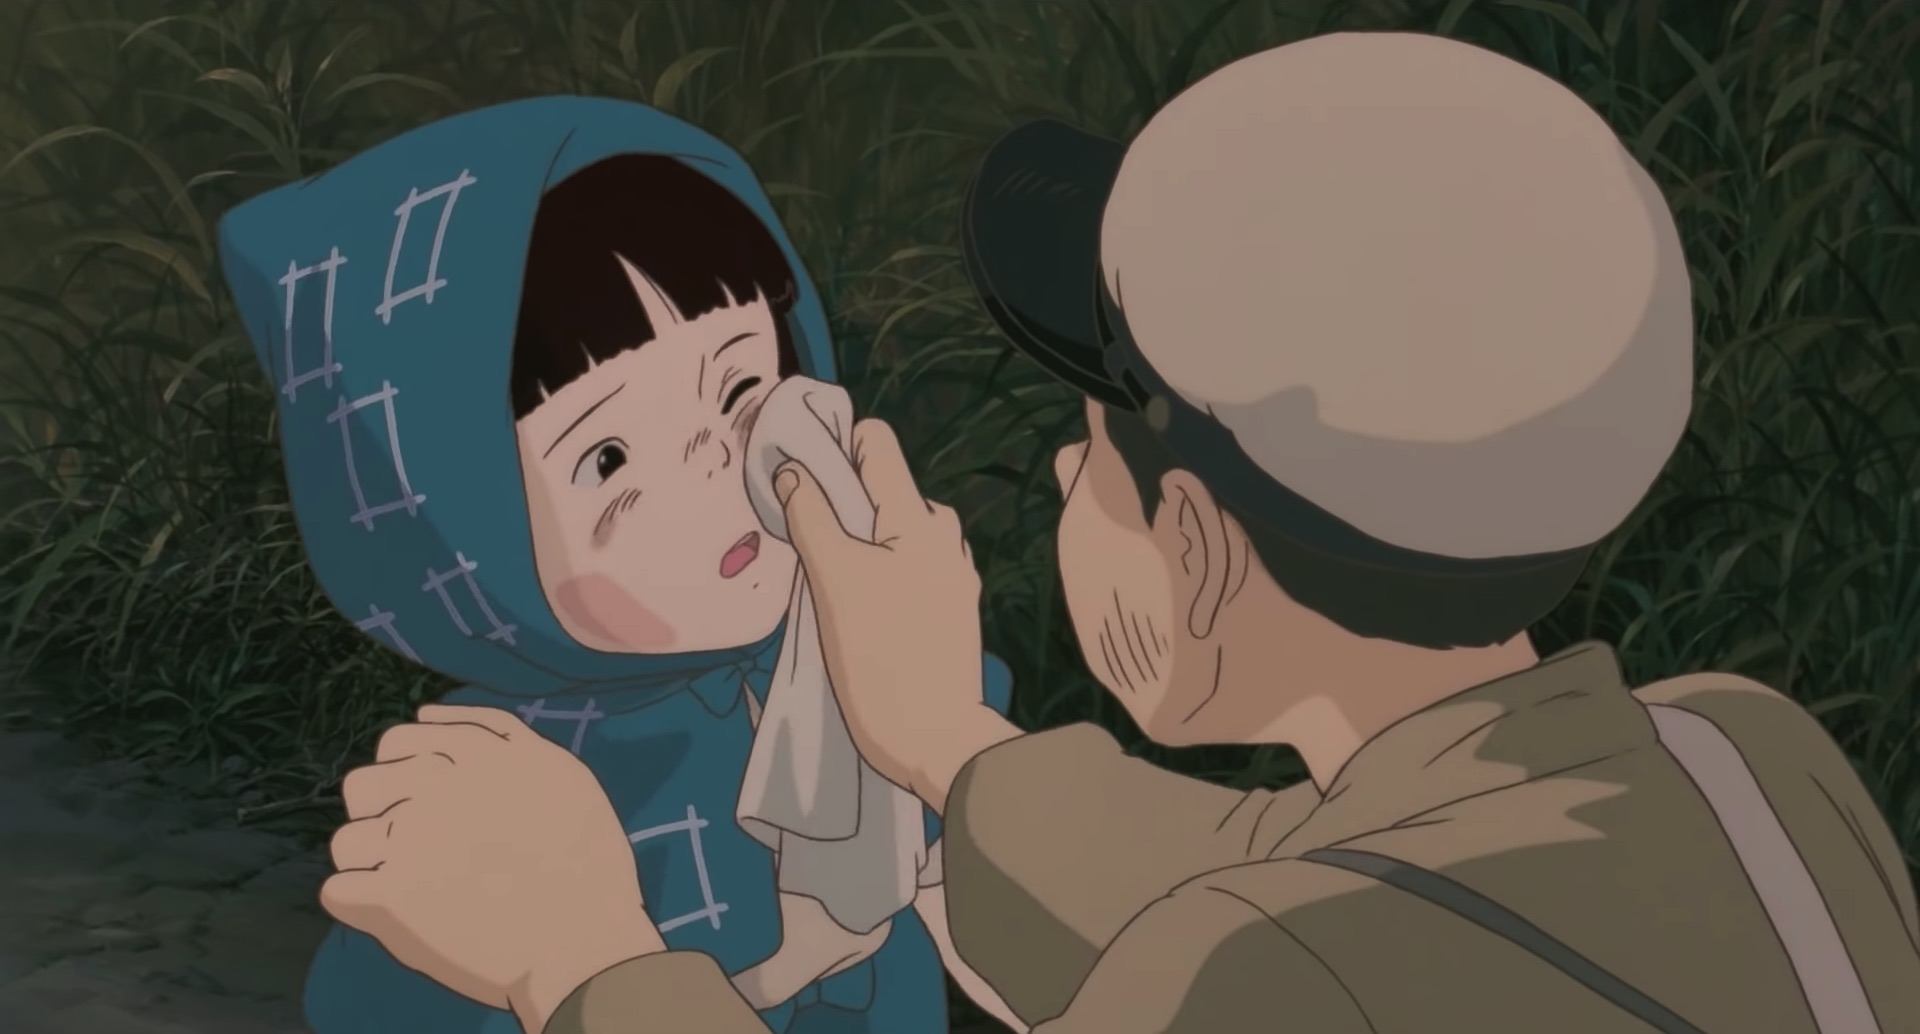 Seven Things I Learned While Writing A Book On Studio Ghibli's